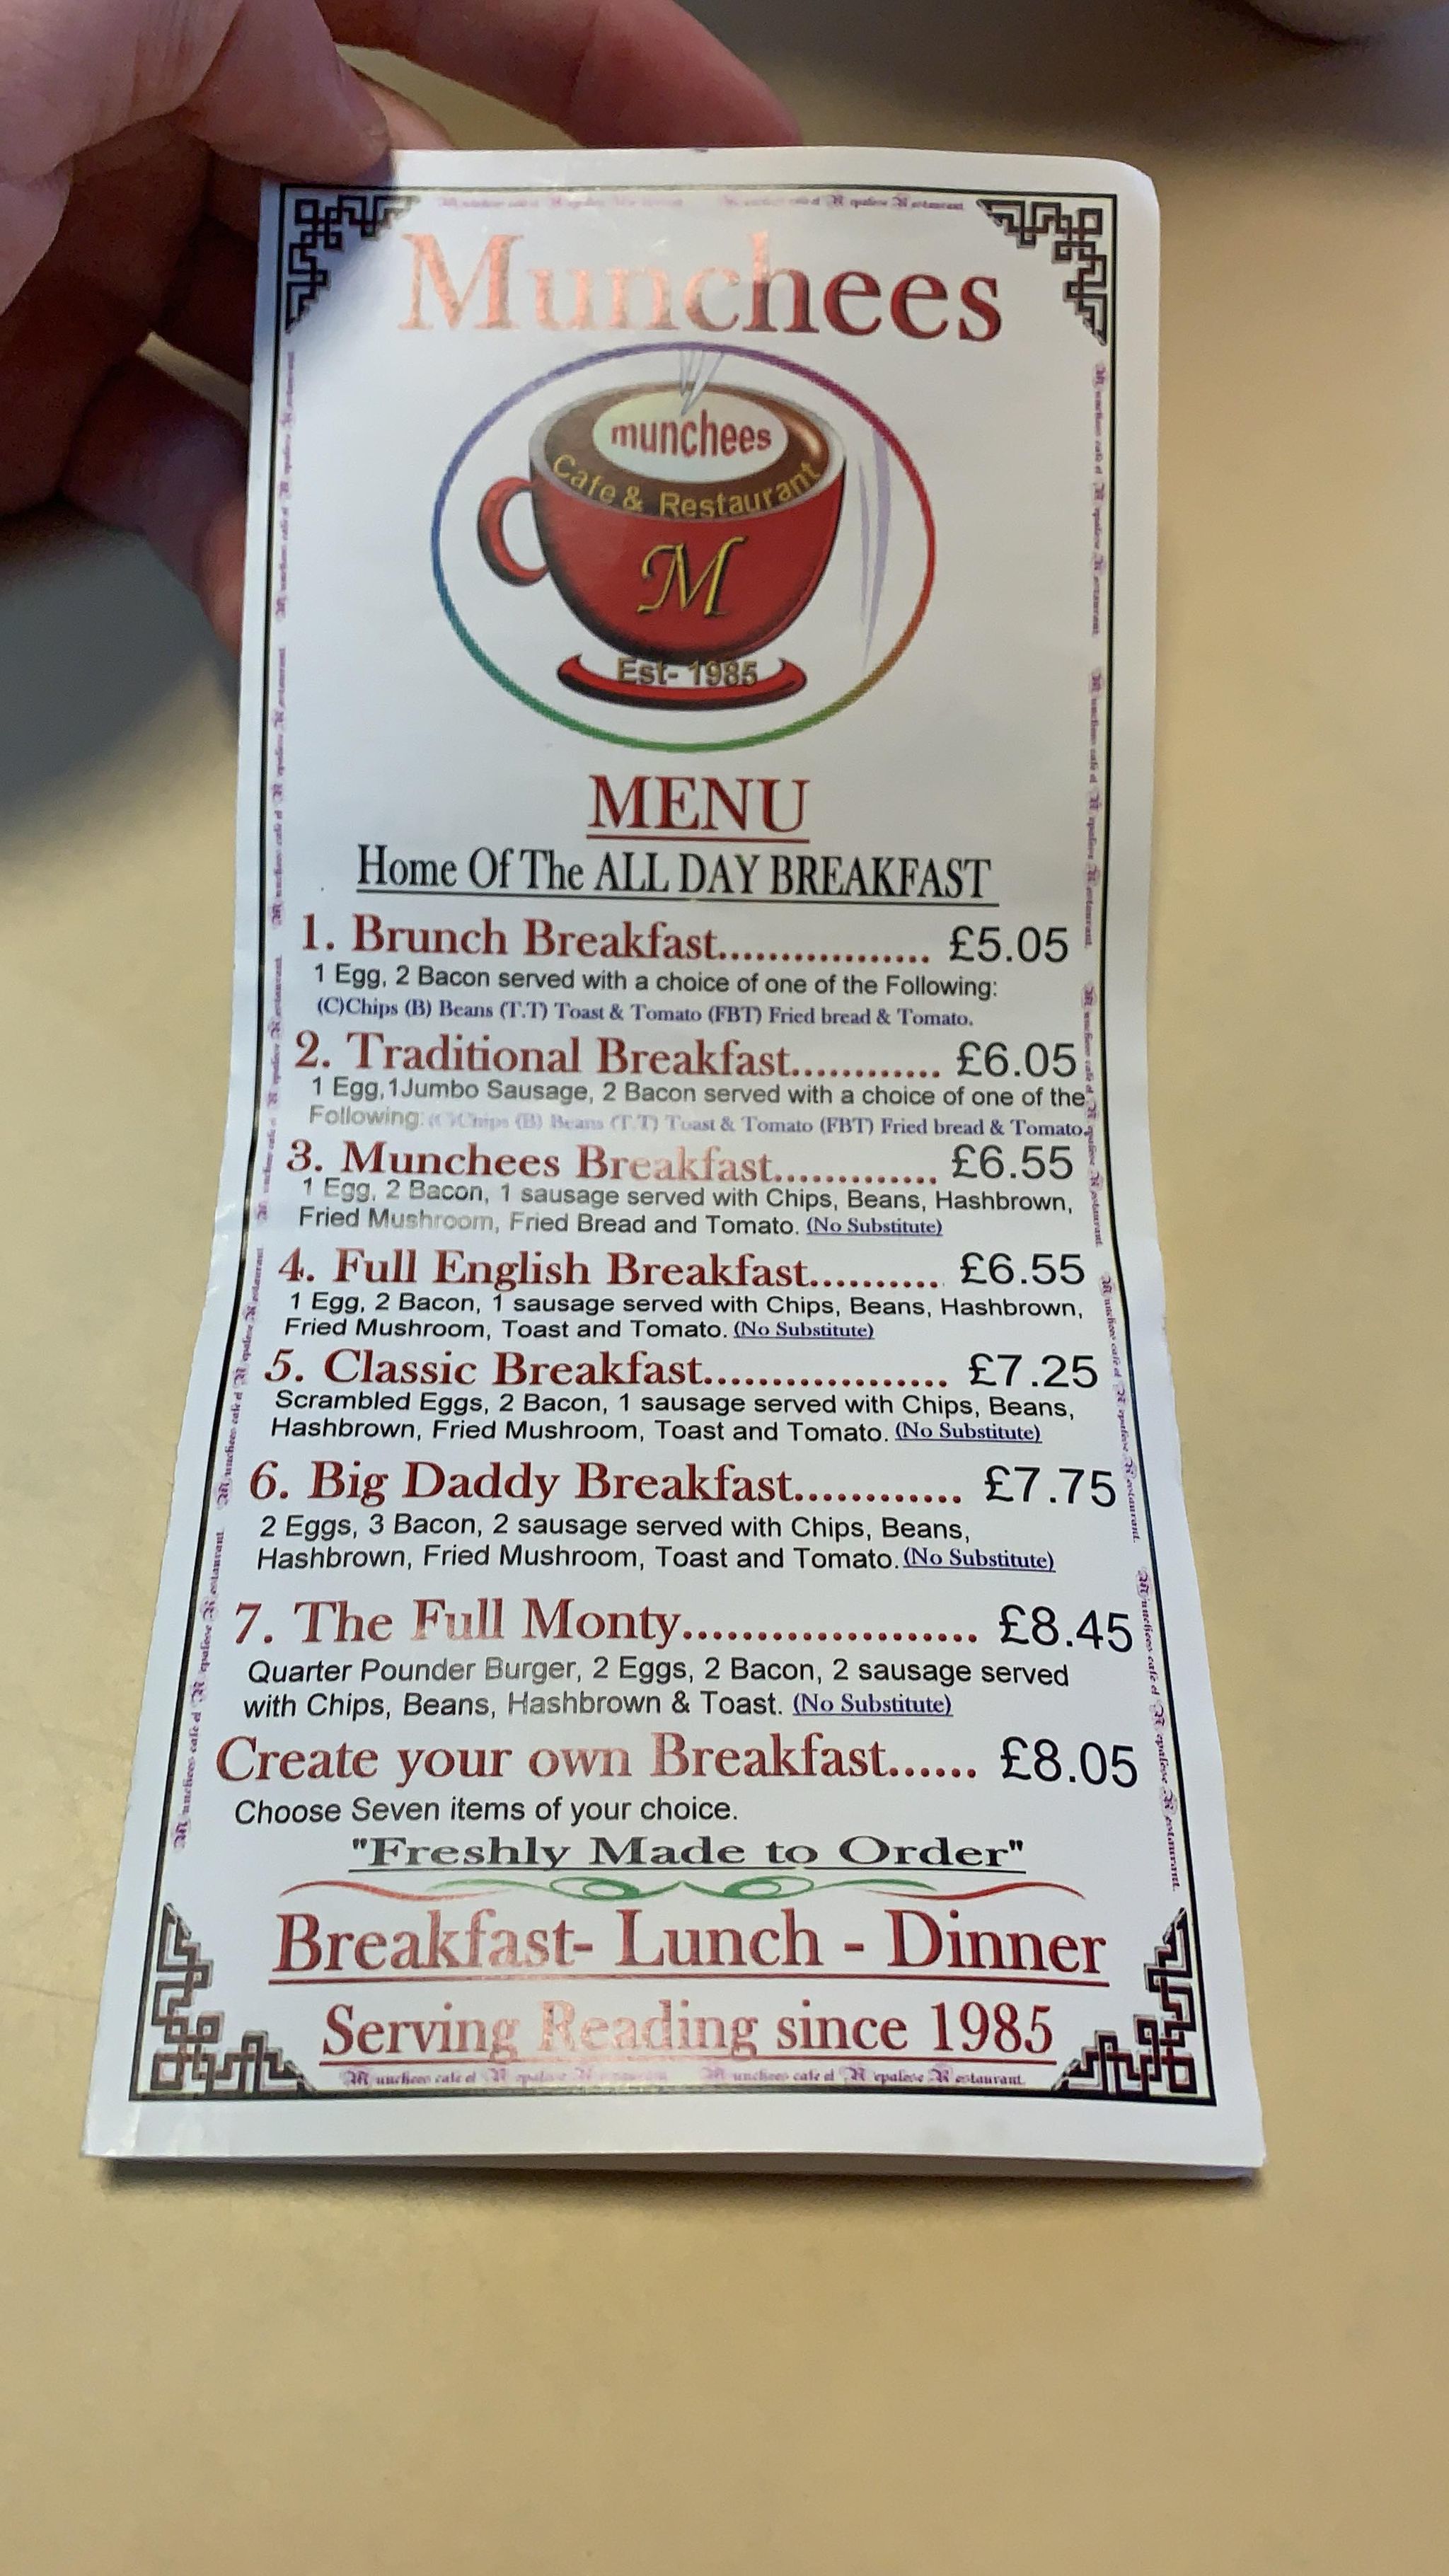 The full- English breakfast options available